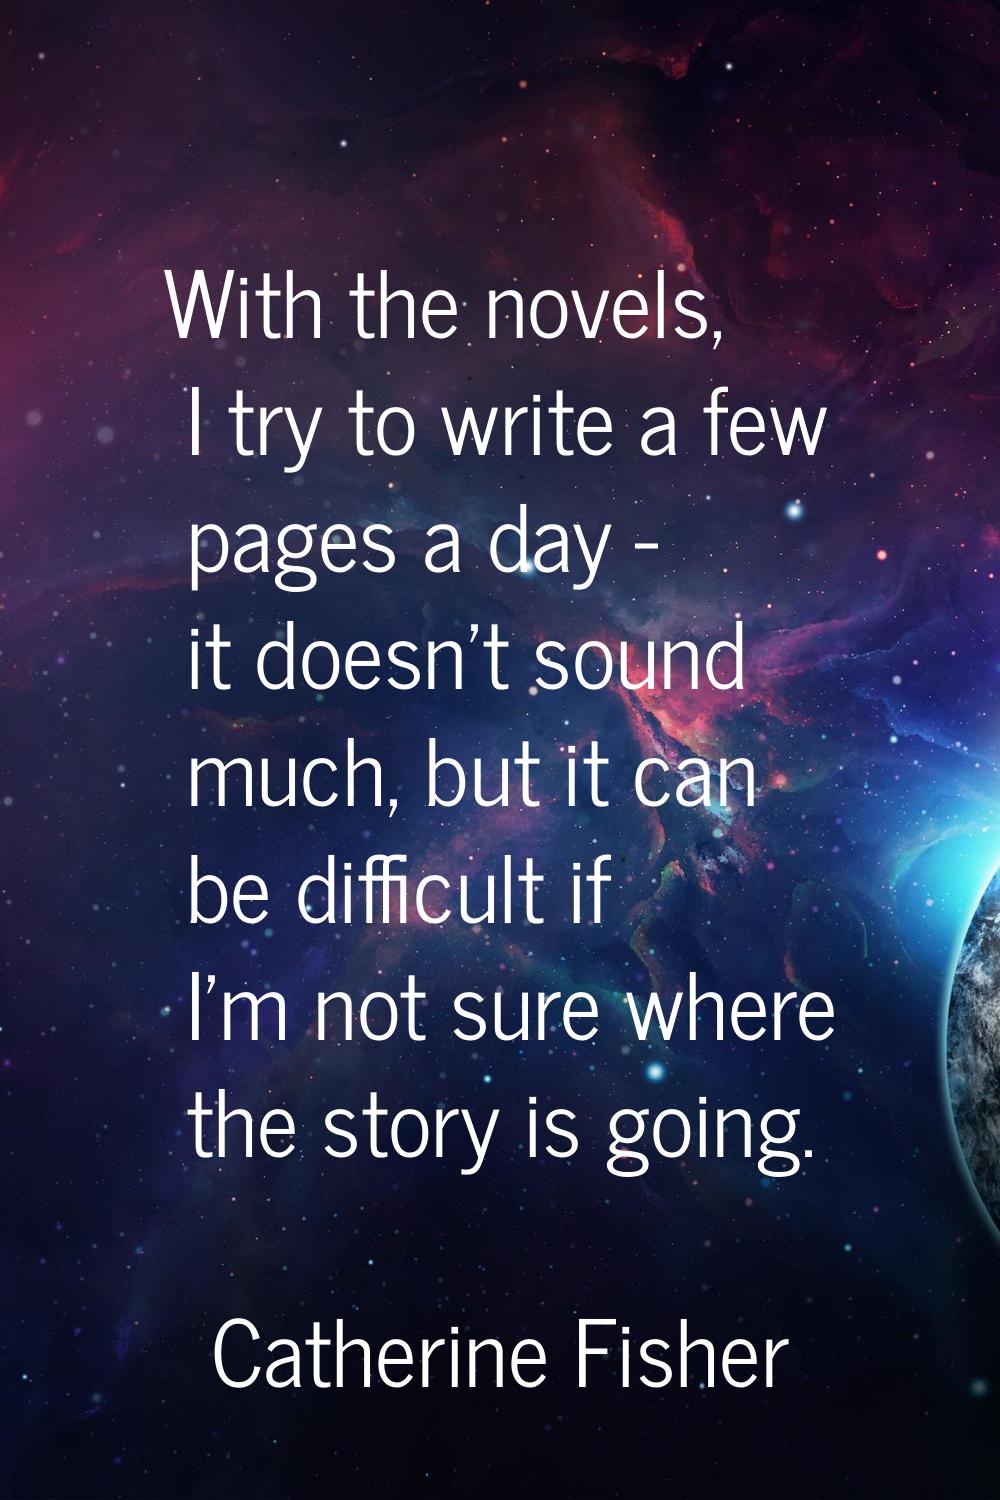 With the novels, I try to write a few pages a day - it doesn't sound much, but it can be difficult 